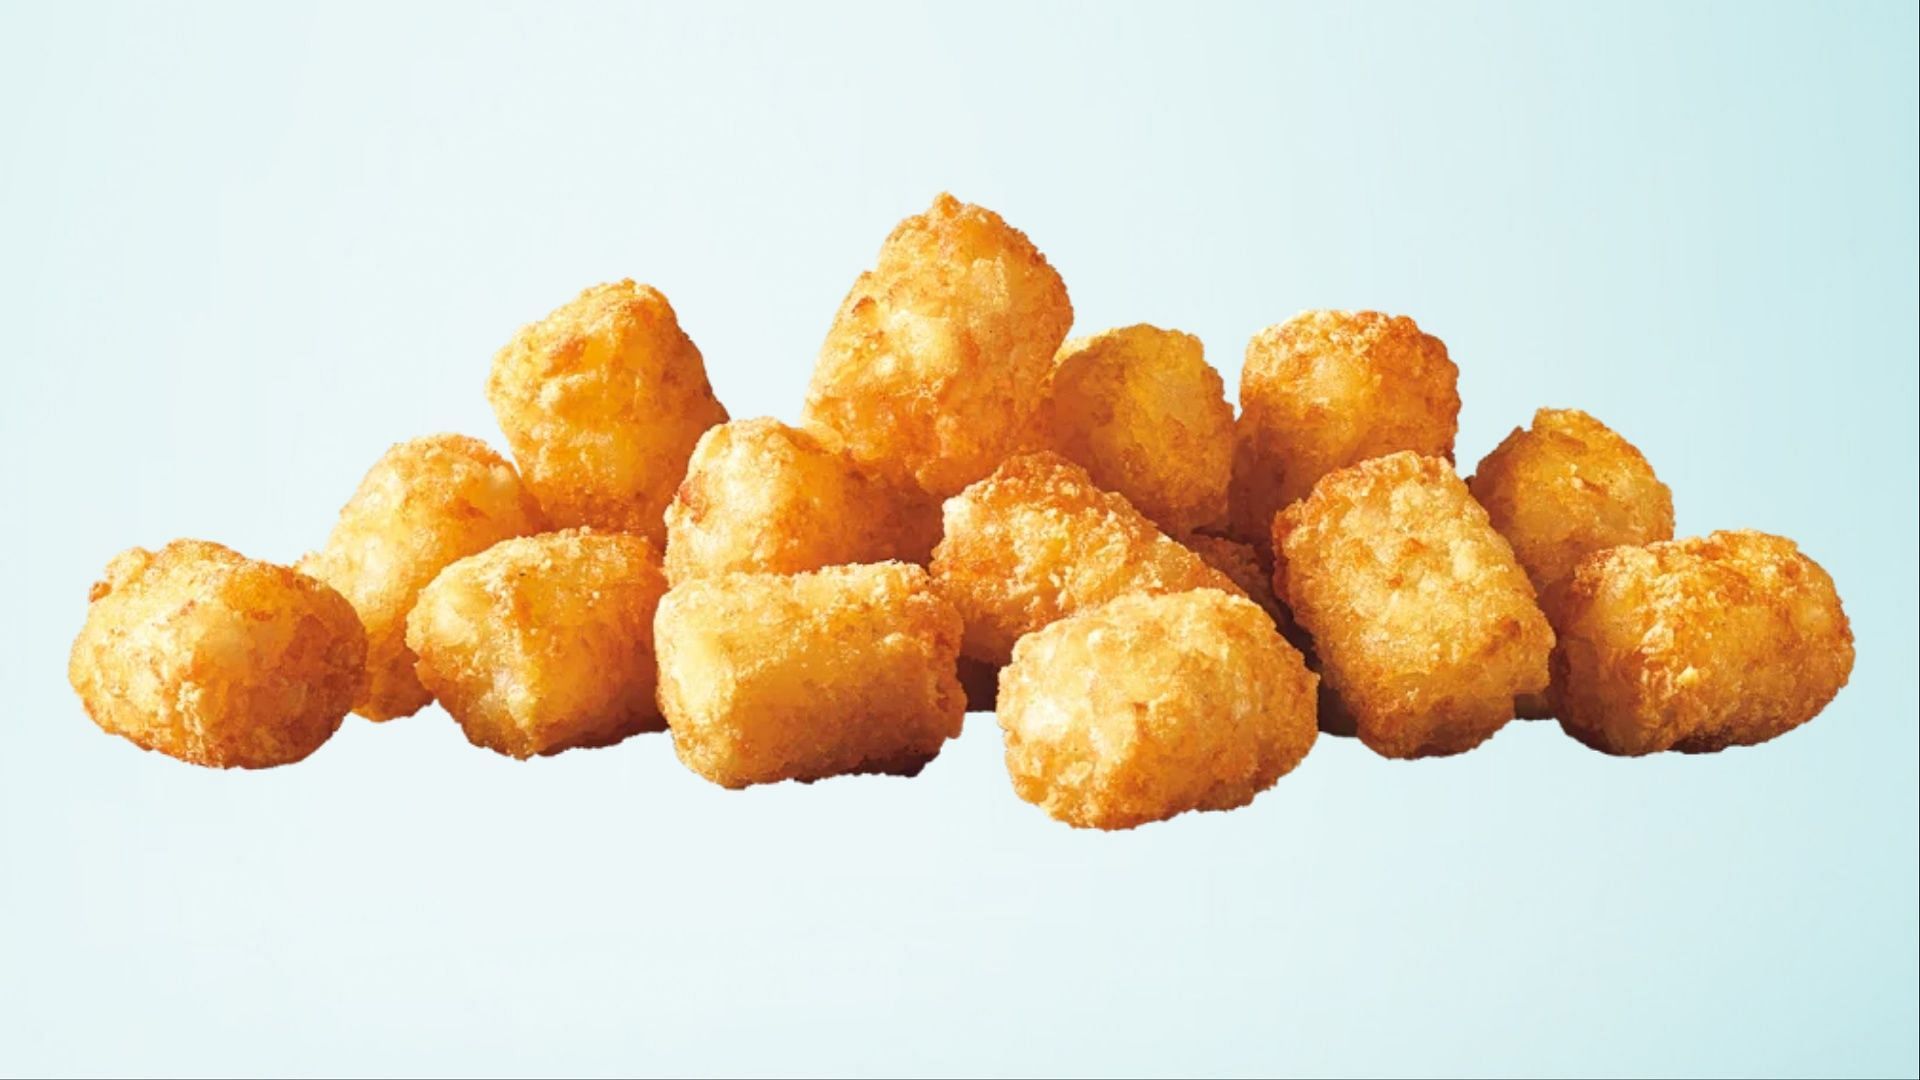 The chain&#039;s Tots are made with potatoes, corn flour, and other ingredients (Image via Sonic)